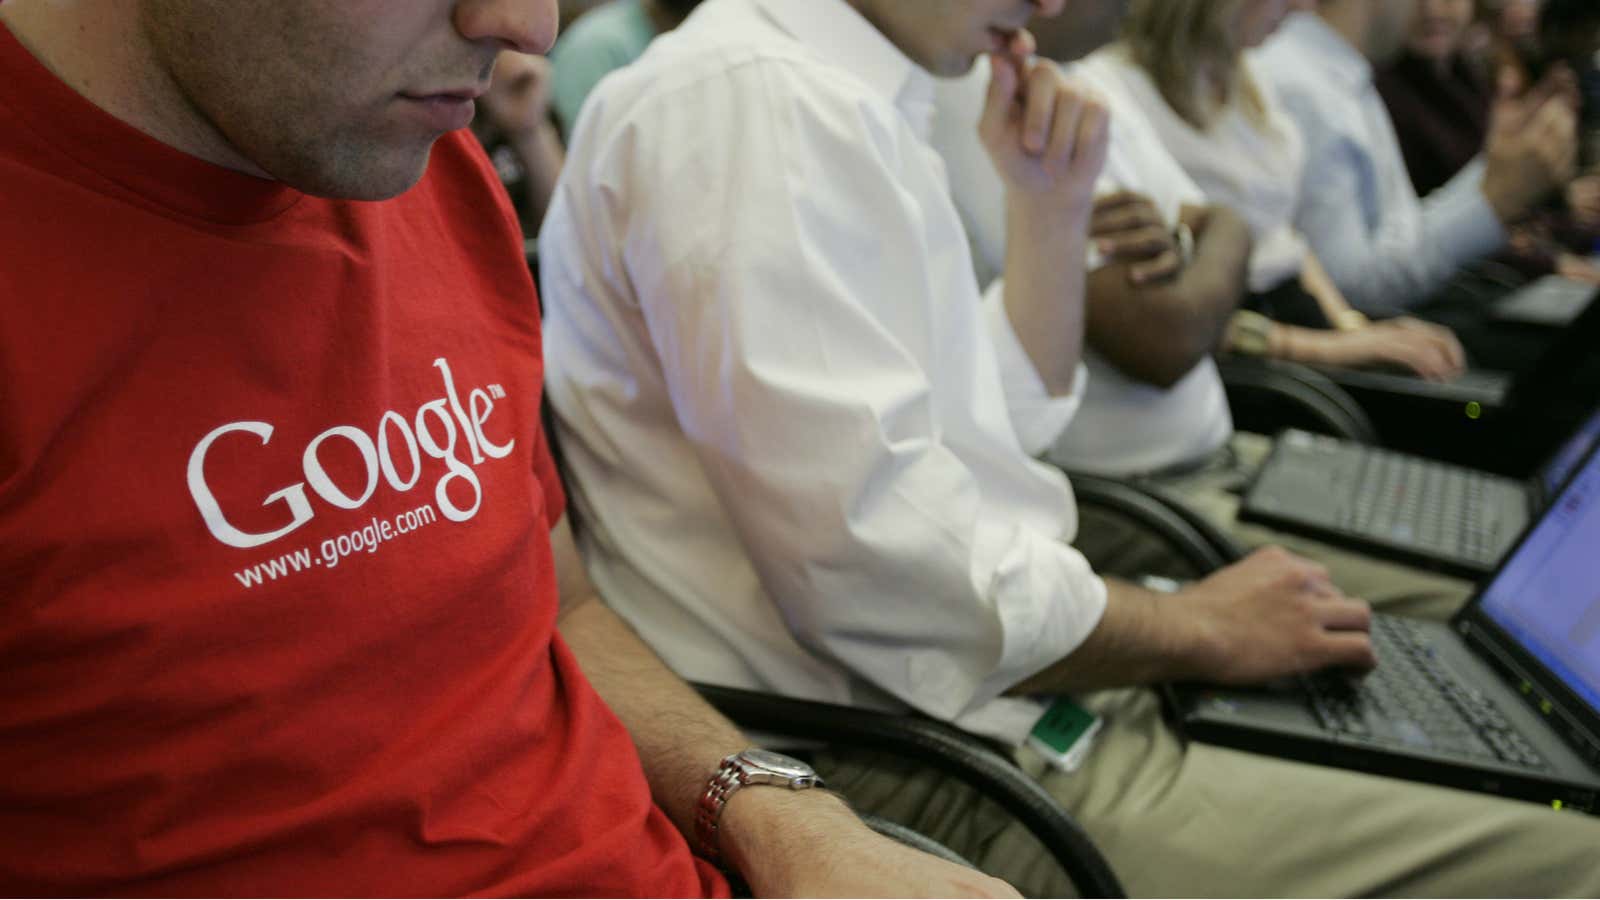 Some people think Google’s lack of diversity is a good thing.